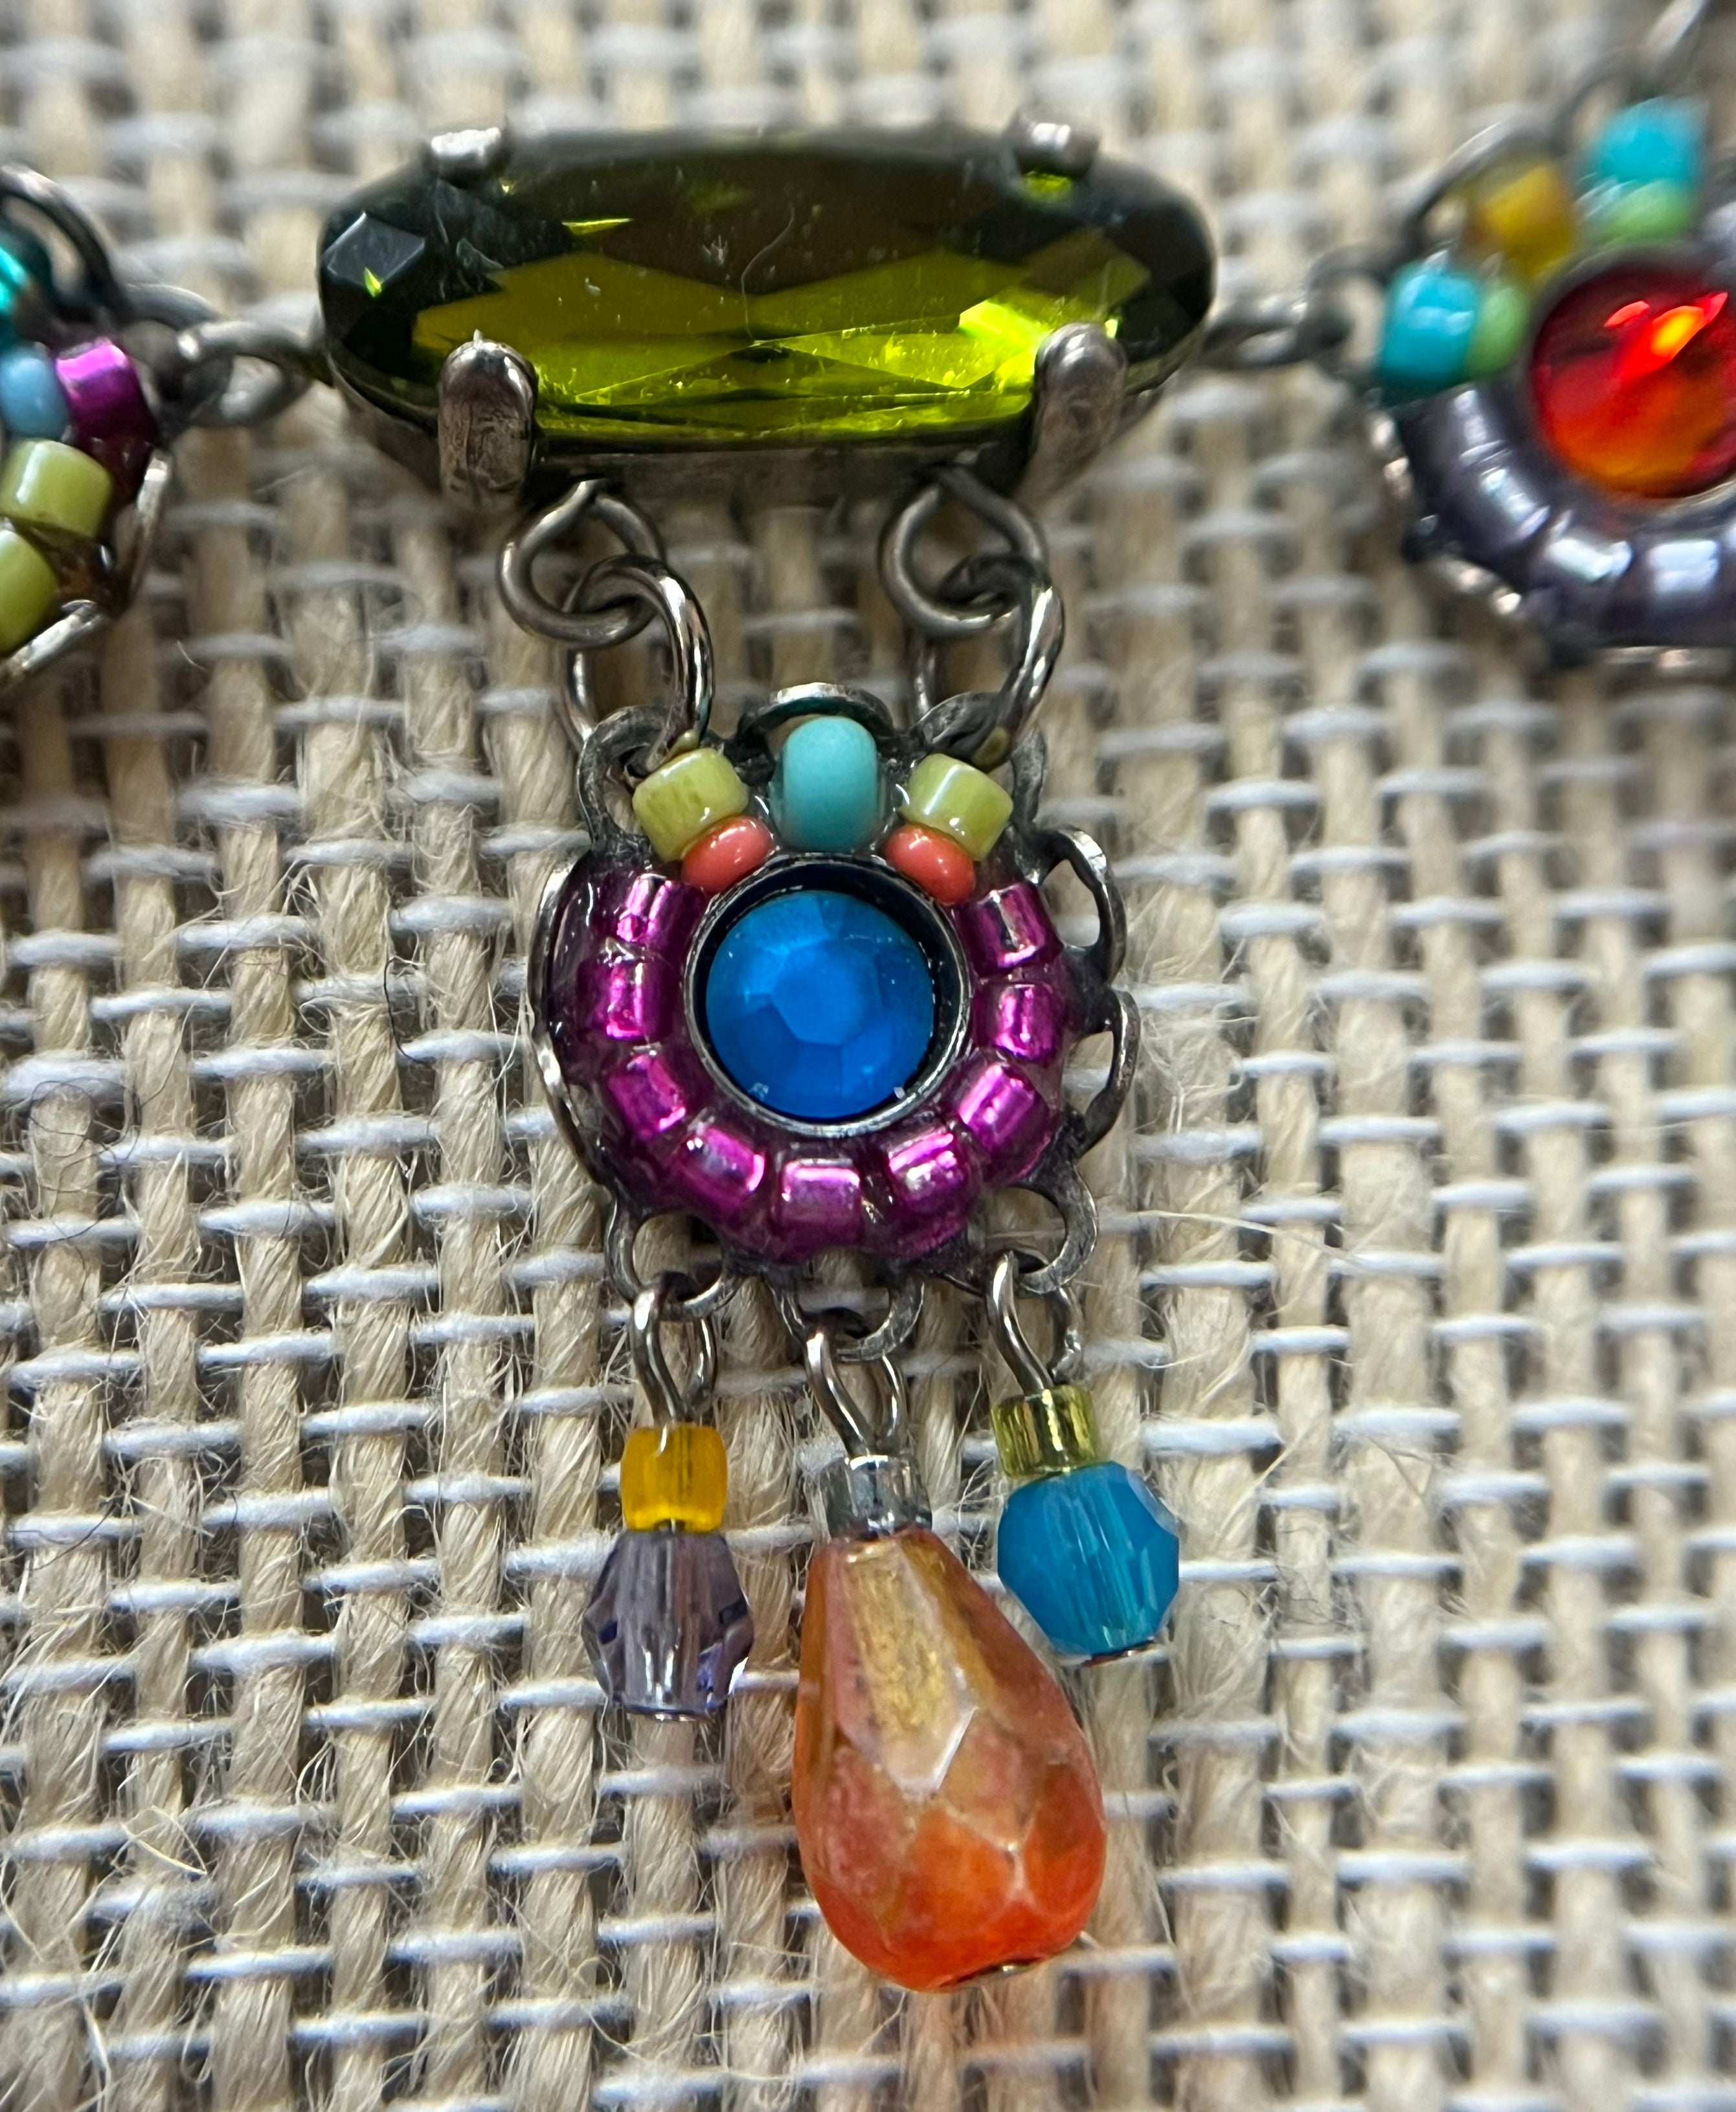 Firefly Jeweled Multicolor Necklace